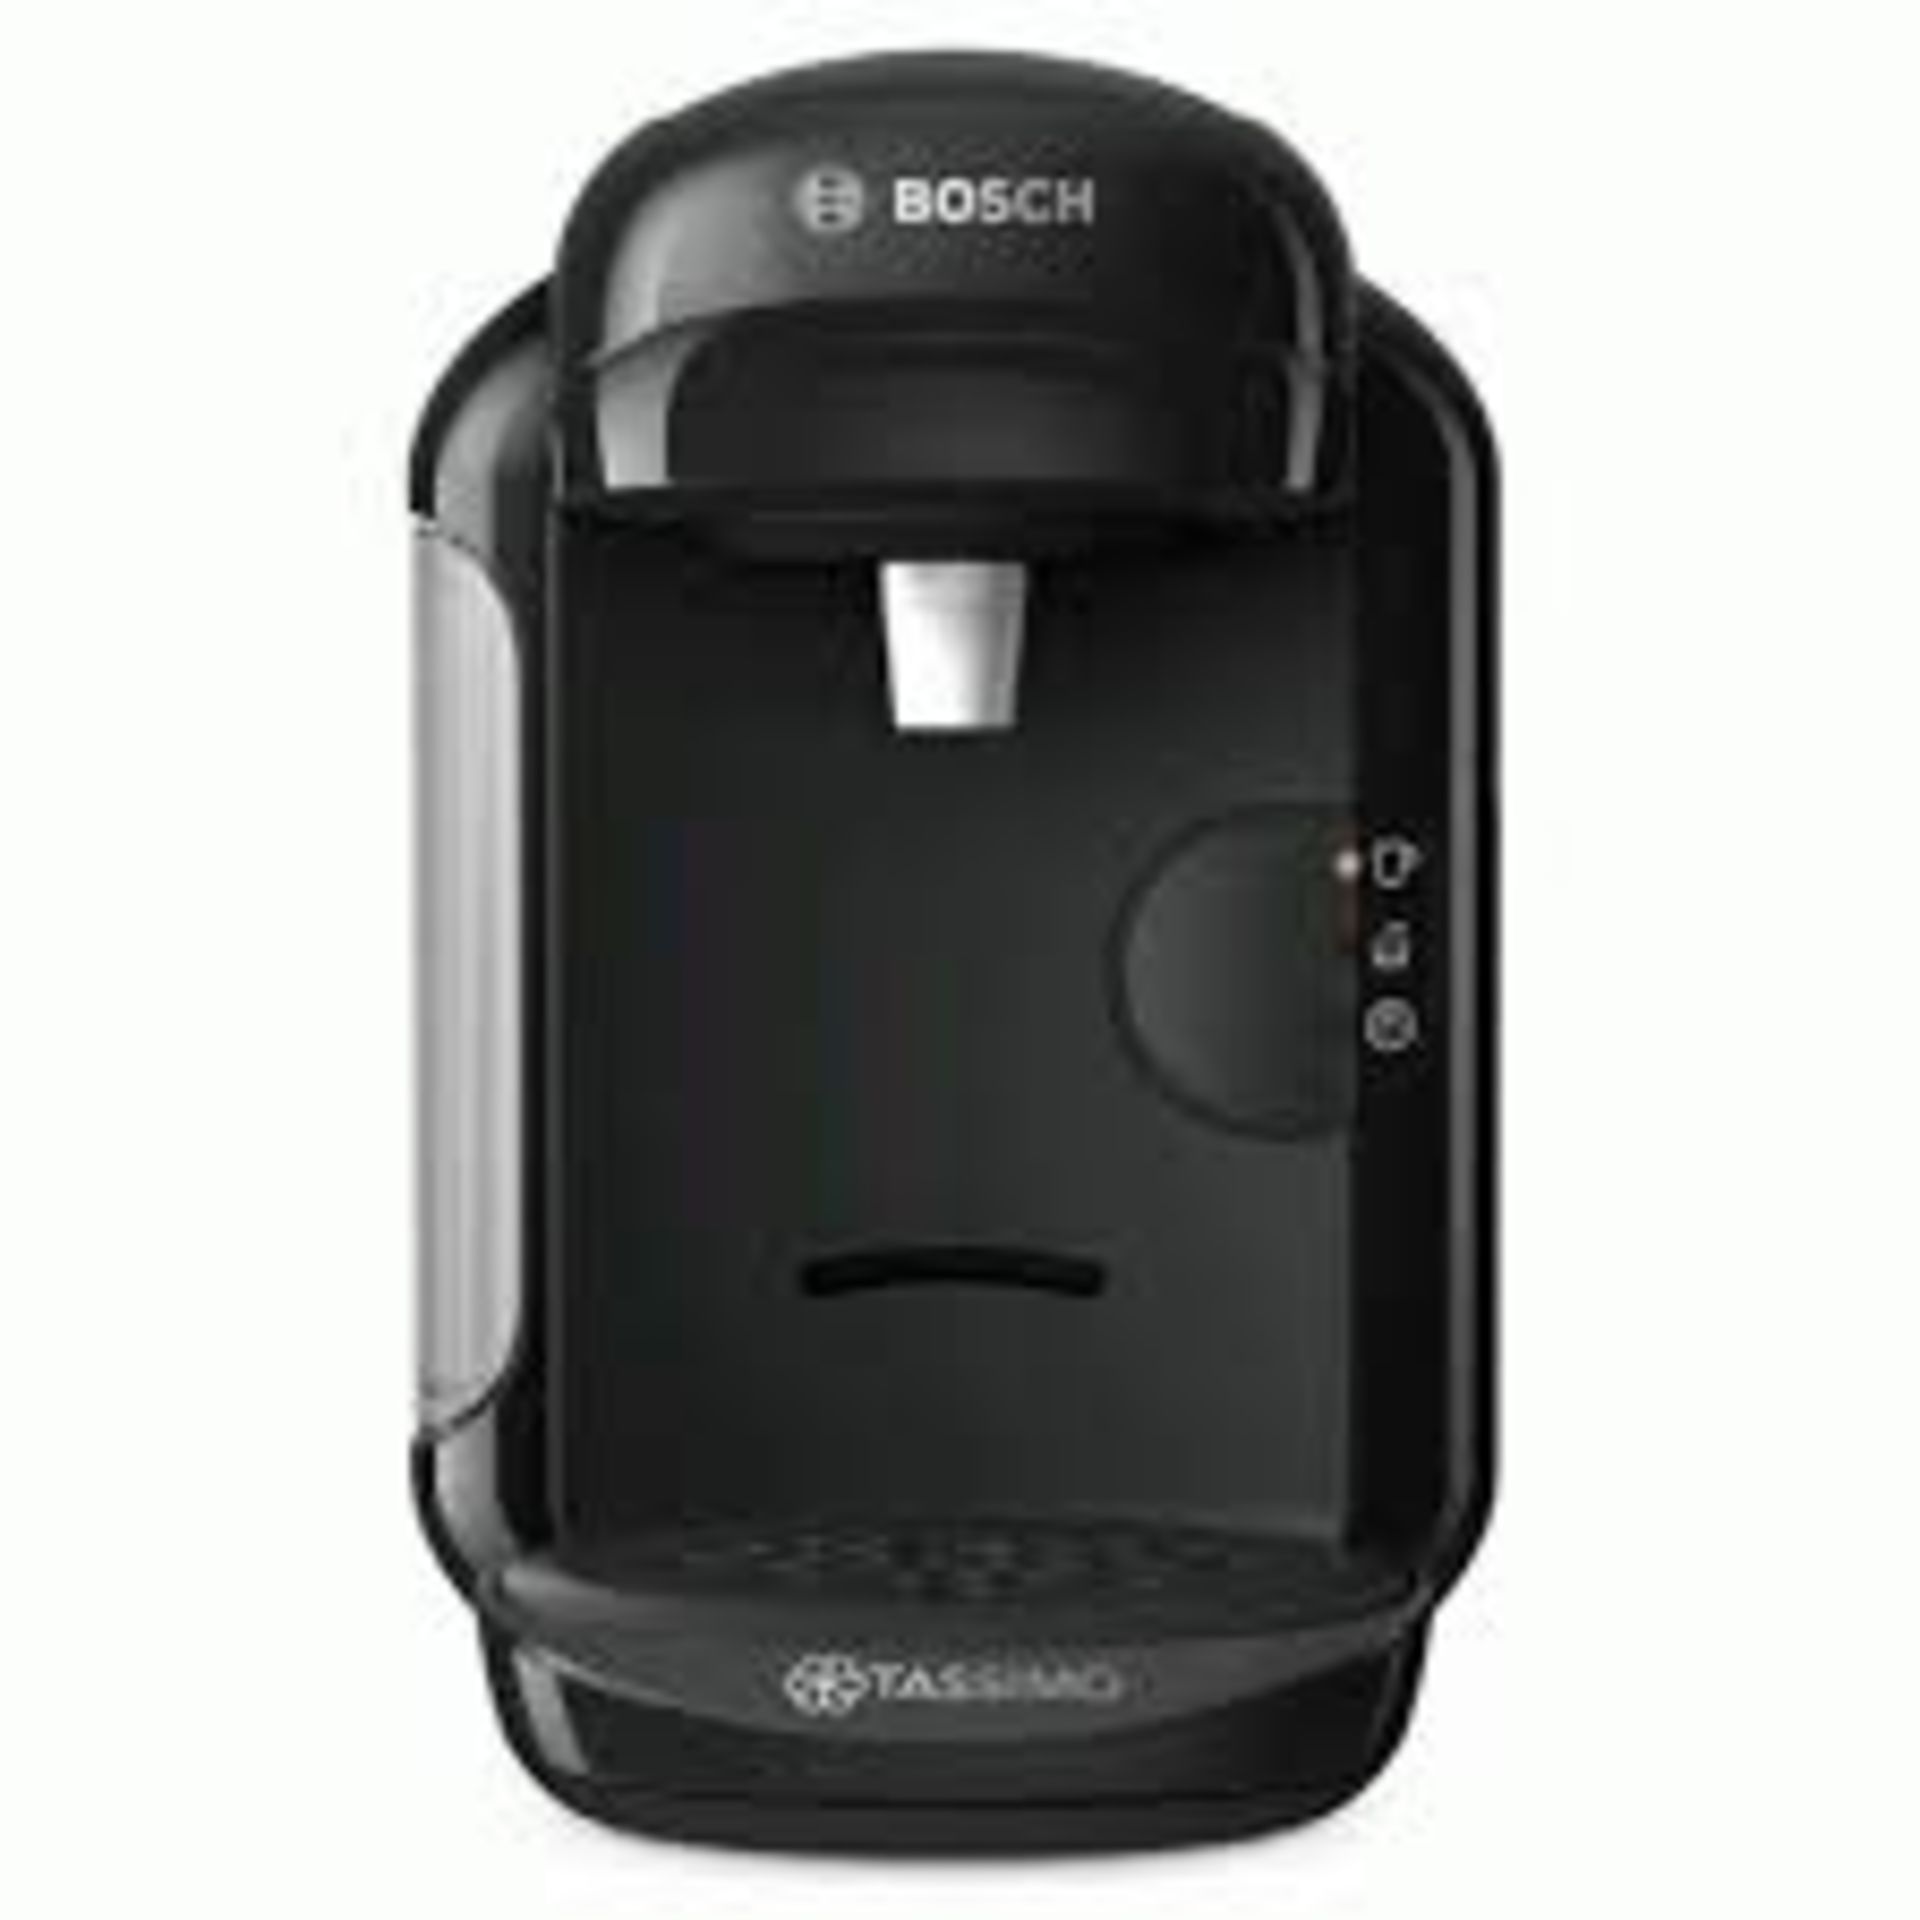 Lot to Contain 2 Boxed Bosch Tassimo Vivy 2 Coffee Machines Combined RRP £200 (Untested Customer